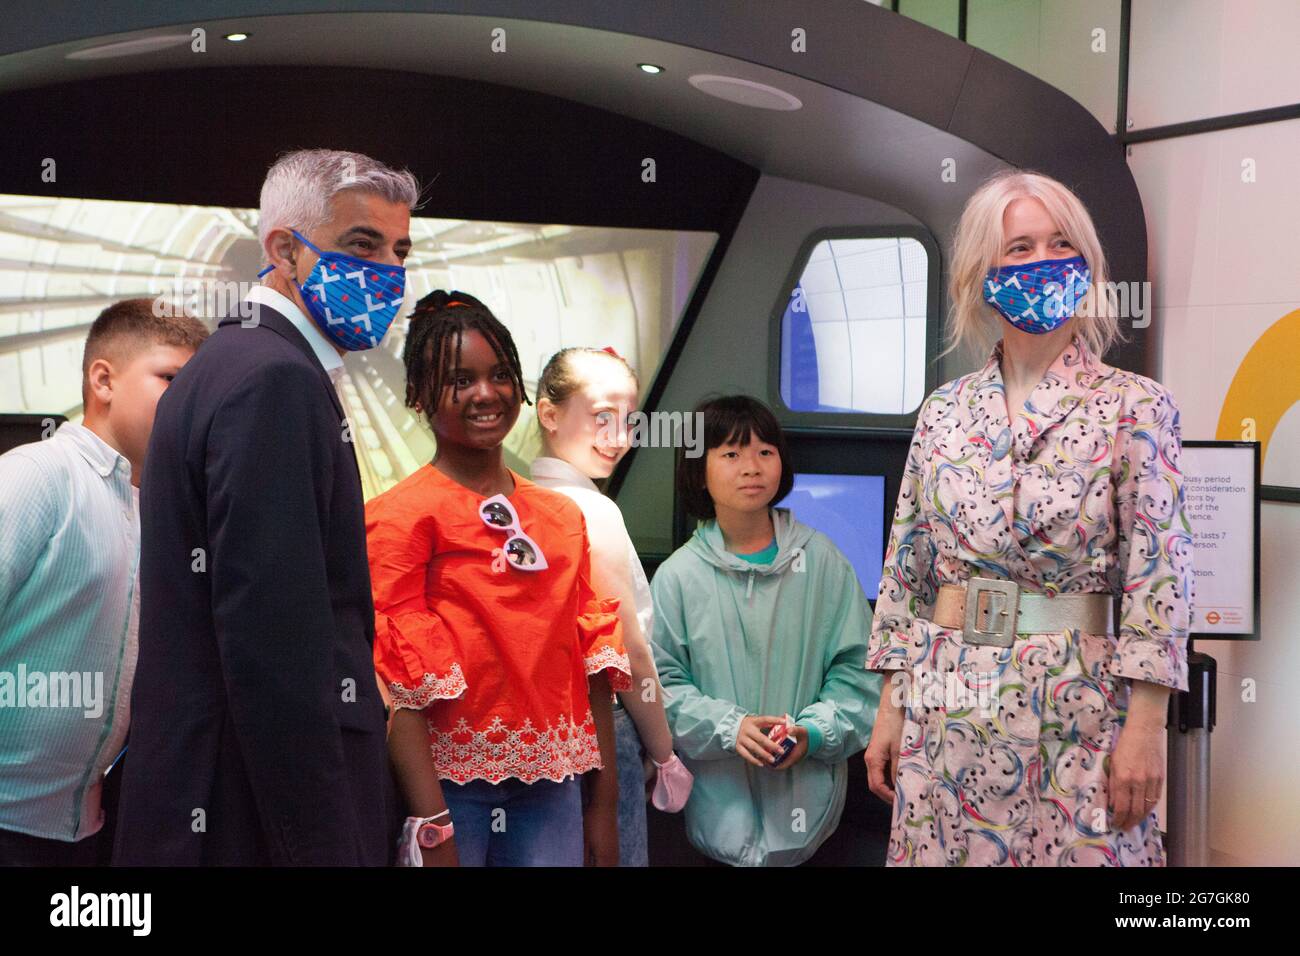 London, UK, 14 July 2021: London Mayor Sadiq Khan visited Covent Garden and the London Transport Museum this morning to launch his #LetsDoLondon campaign. The aim is to encourage tourists to visit central London. As he and Transport for London are making masks compulsory on London Underground it is hoped that tourists can visit safely despite rising coronavirus numbers. At the museum he got to sit in the driver's seat of a bus, which honours his father's job as a bus driver. With him were Justine Simons (Deputy Mayor for Culture and the Creative Industries) and Sam Mullins (Director of the Lon Stock Photo